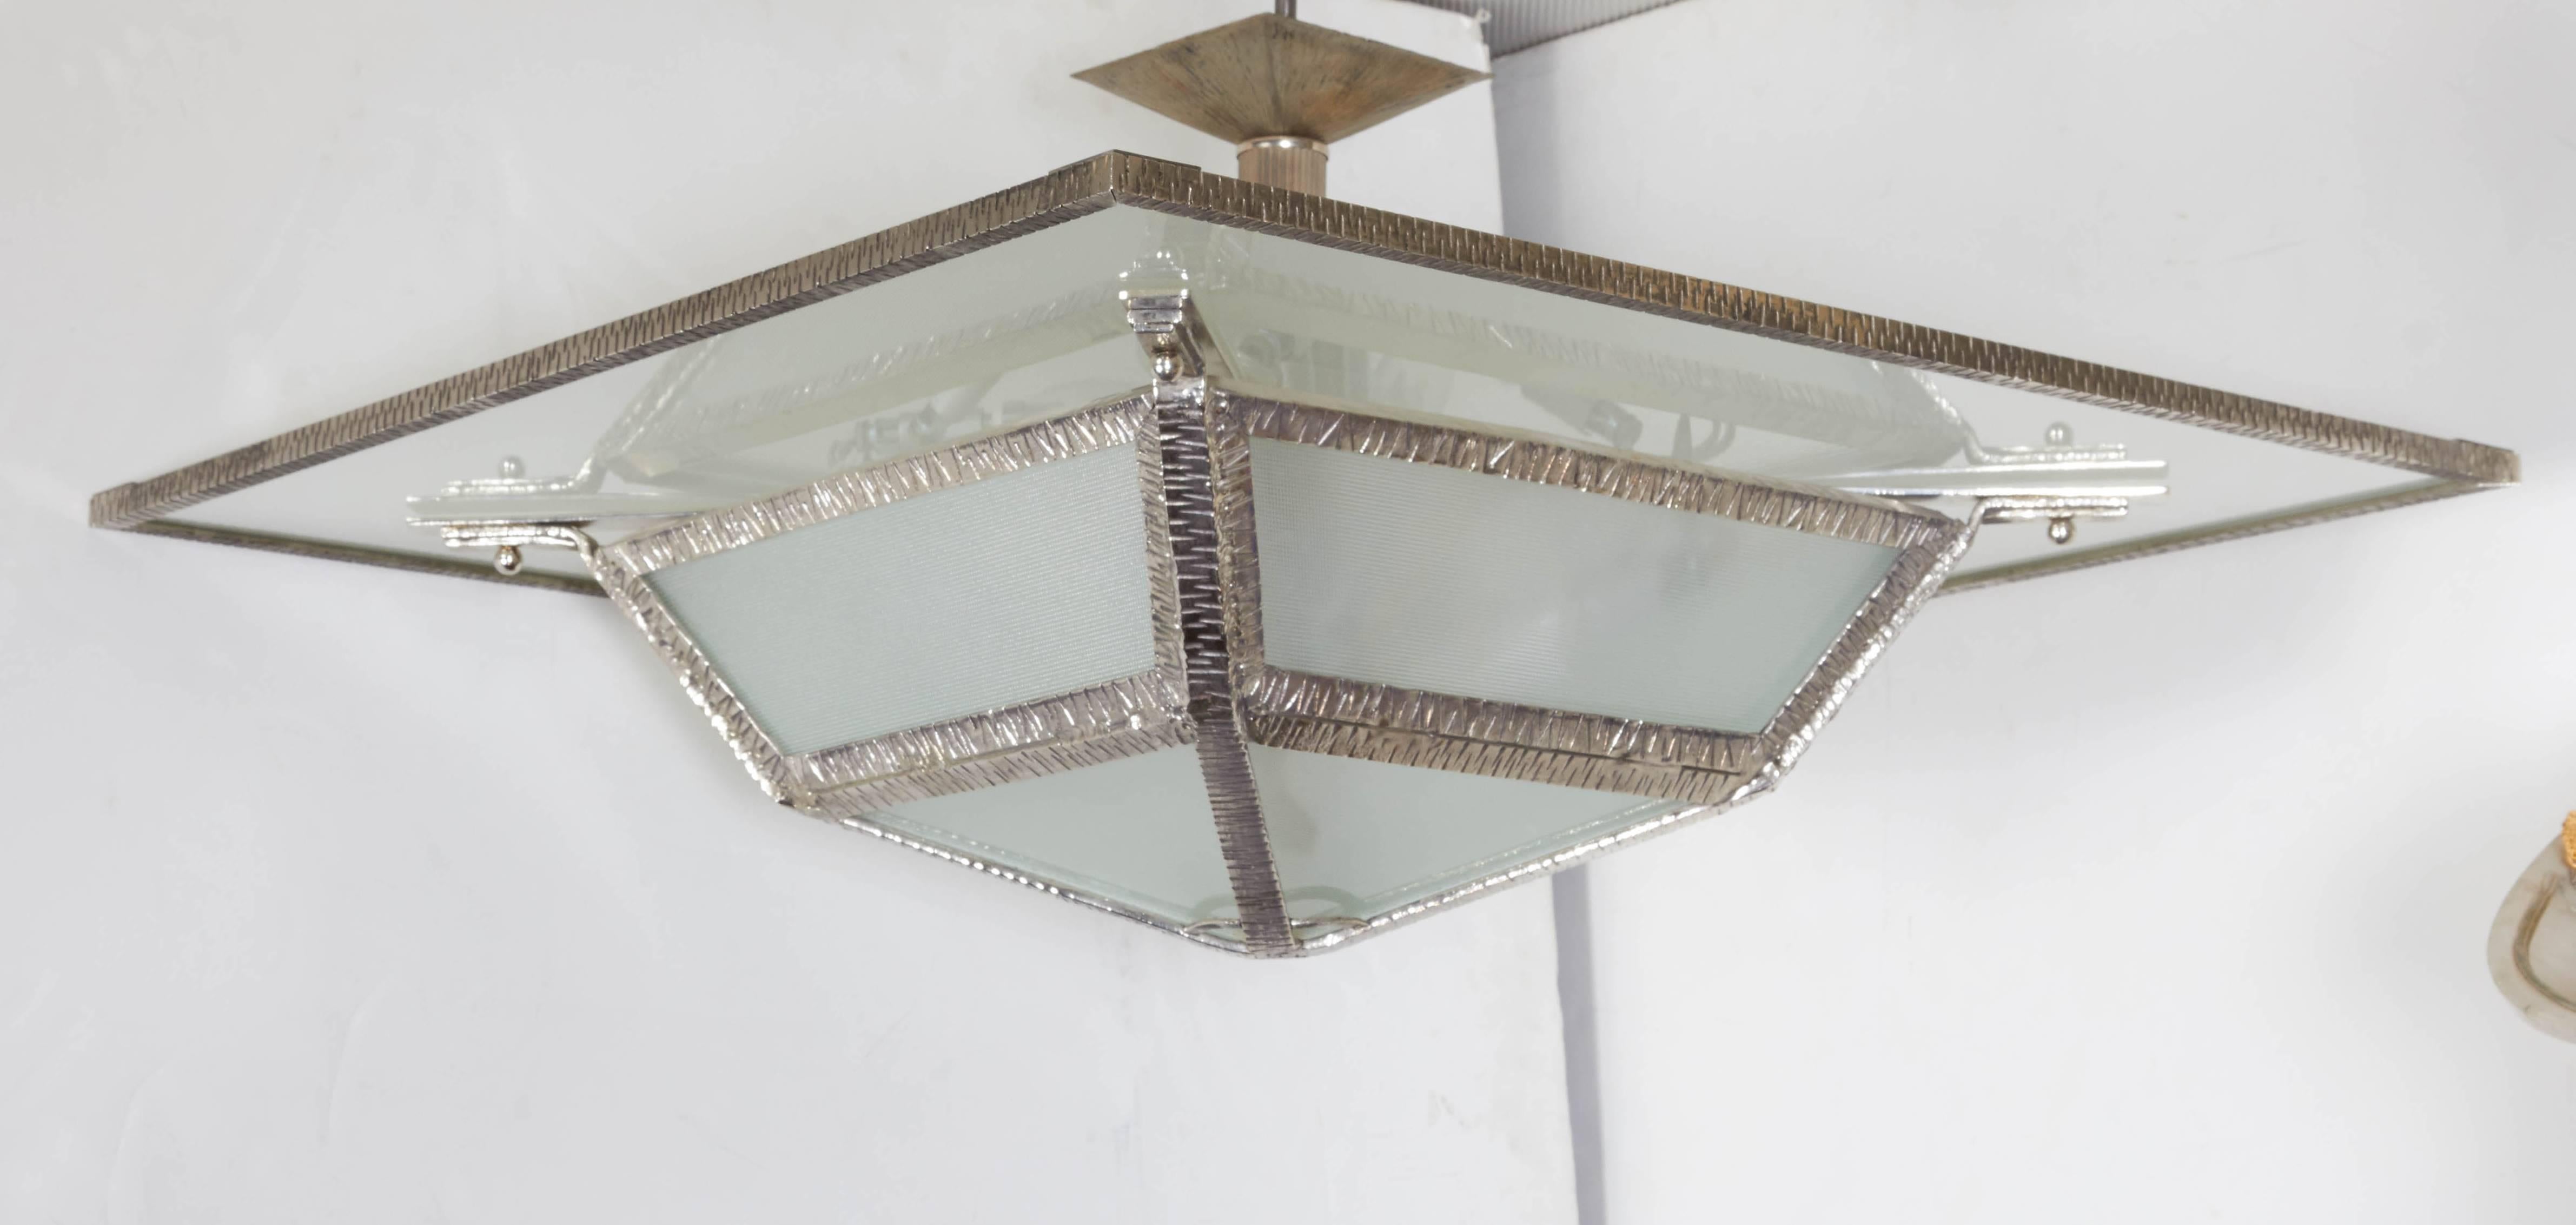 French Modern nickeled iron, bronze and glass chandelier; clean, architectural and modern in design. Overall square shape with pyramid bottom. 
This chandelier hovers right under the ceiling like a flush mount. 
Can even be shortened a bit more or